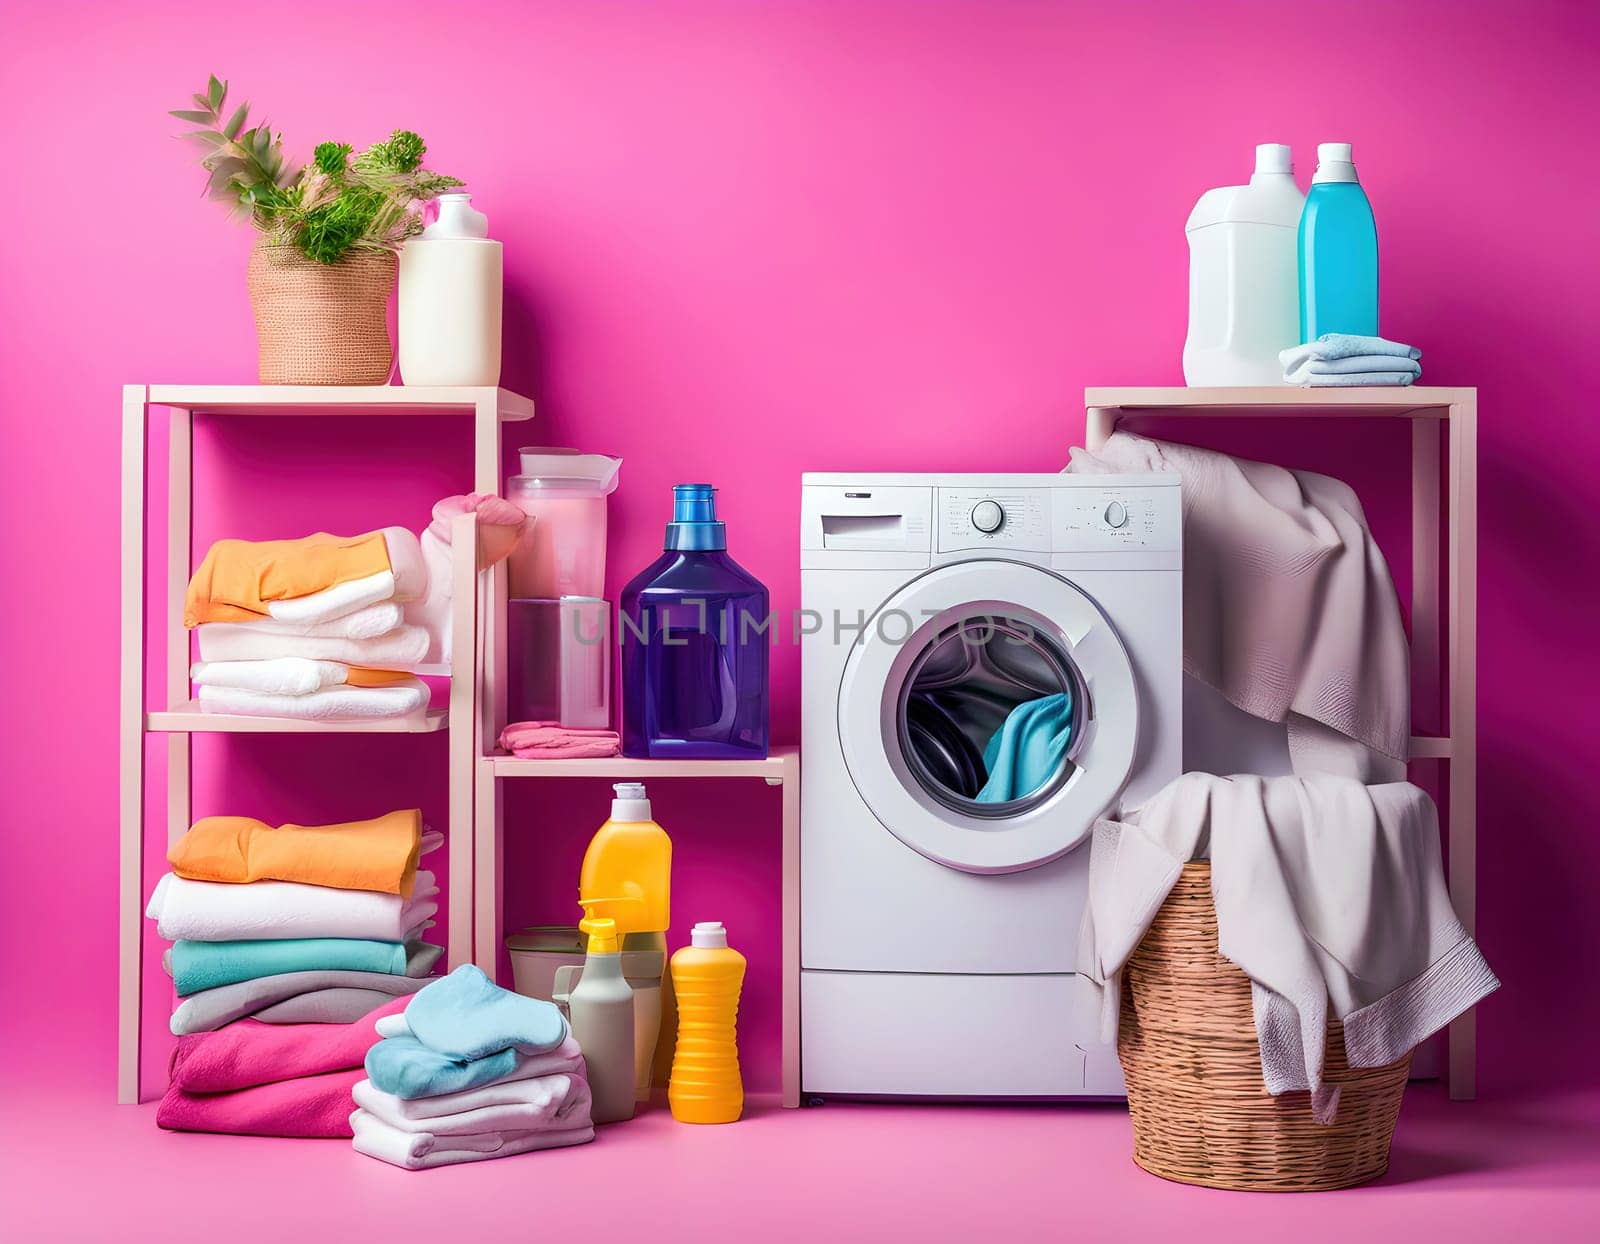 Colorful Home Laundry Room Setup with Washing Machine Created by artificial intelligence